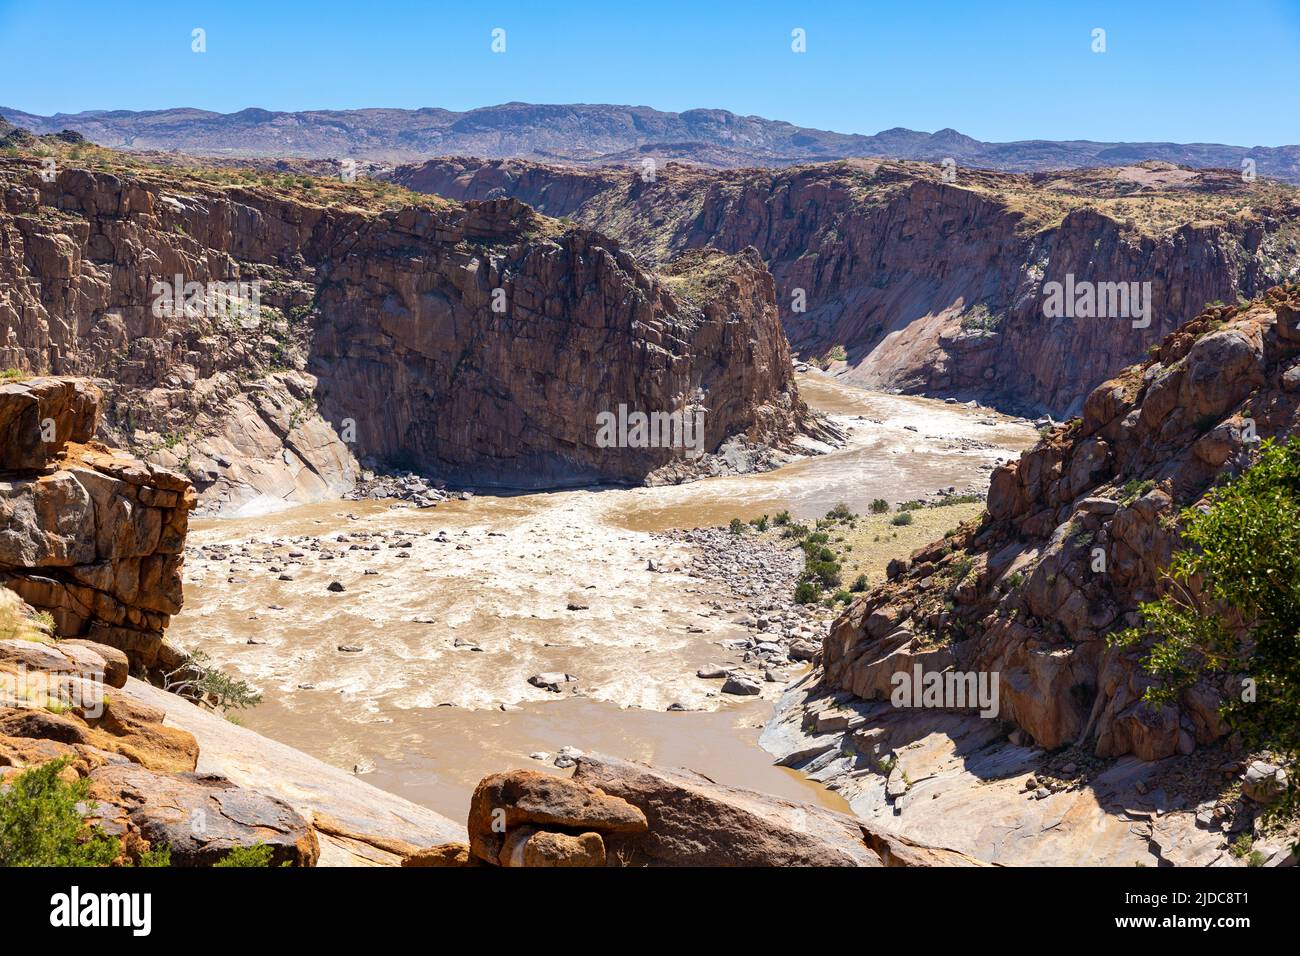 The Orange river flowing in the Orange river gorge at the Augrabies National Park in The Northern Cape province of South Africa. Stock Photo